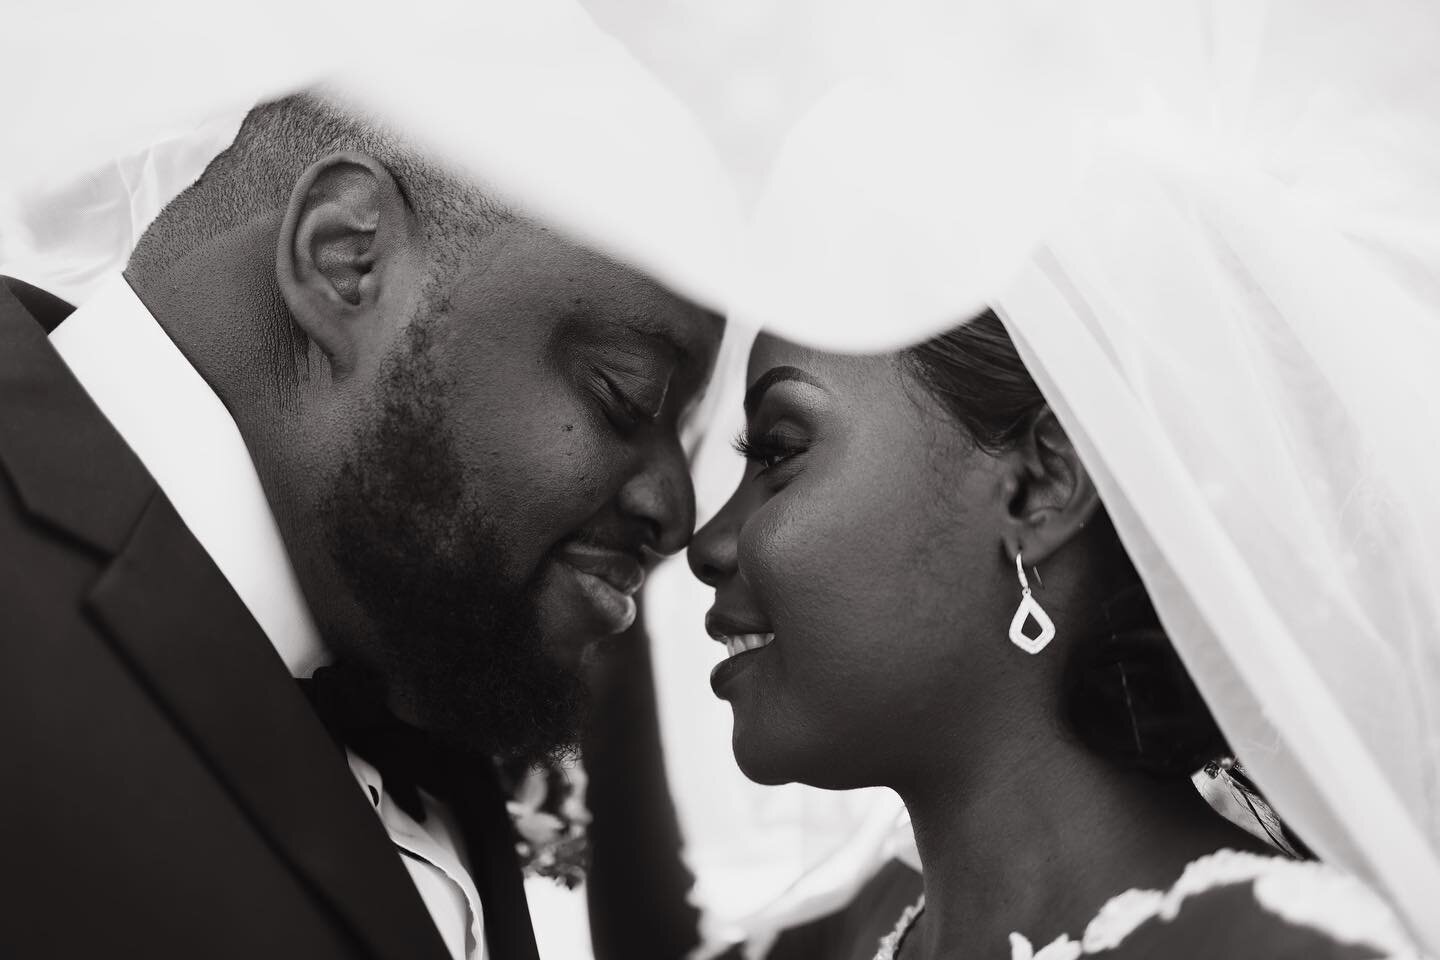 Love is in the air&hellip;congratulations on your union!!💕

.
.
.
#weddingphotography #scweddingphotographer #ncweddingphotographer #africanwedding #nigerianwedding #photography #cltwedding #803wedding #704weddings #eventplanner #fallwedding #couple